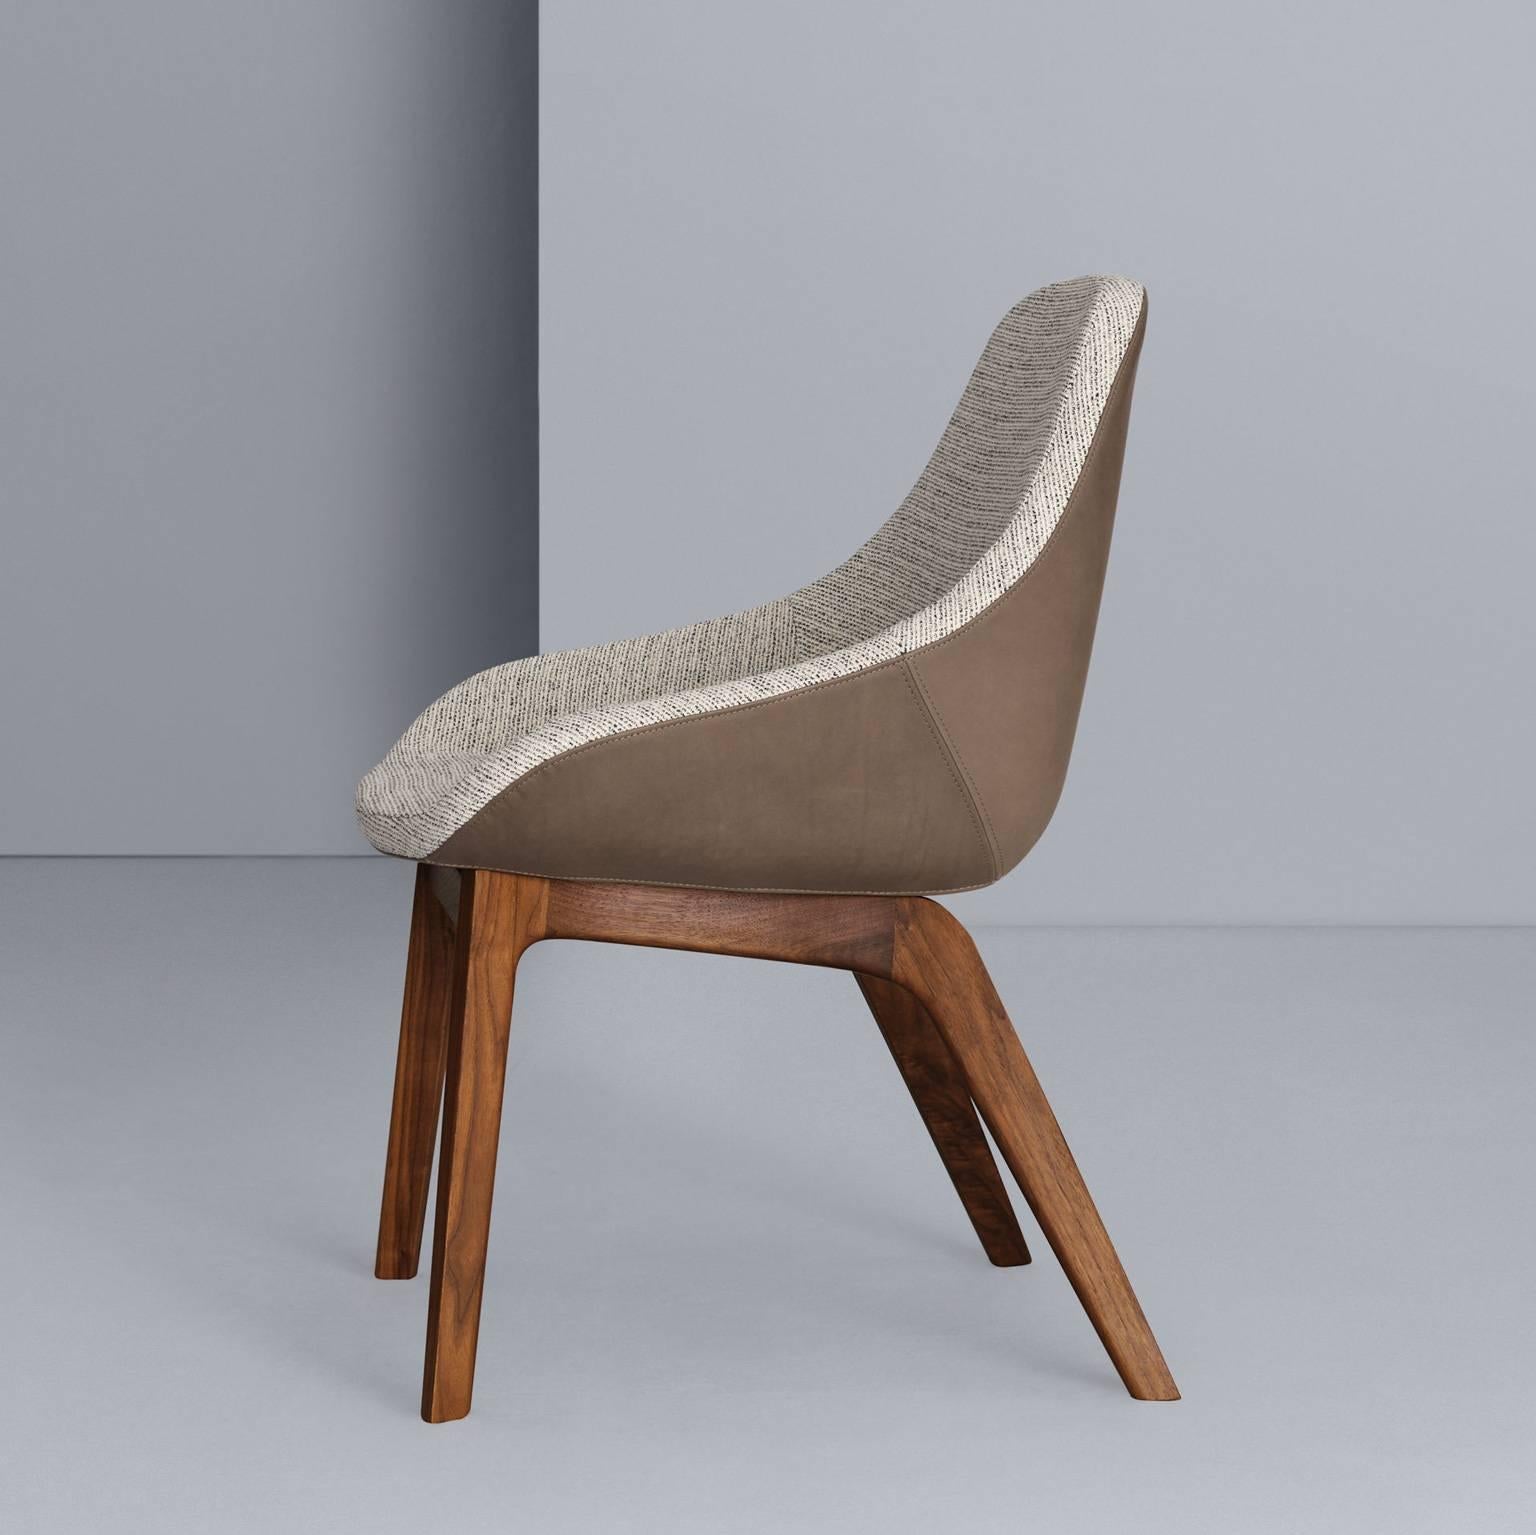 The new member of the Morph family is the dining chair morph dining. Morph dining particularly stands out through its opulent appearance as well as an exceptionally high level of comfort. Sitting down and standing up are both especially easy thanks